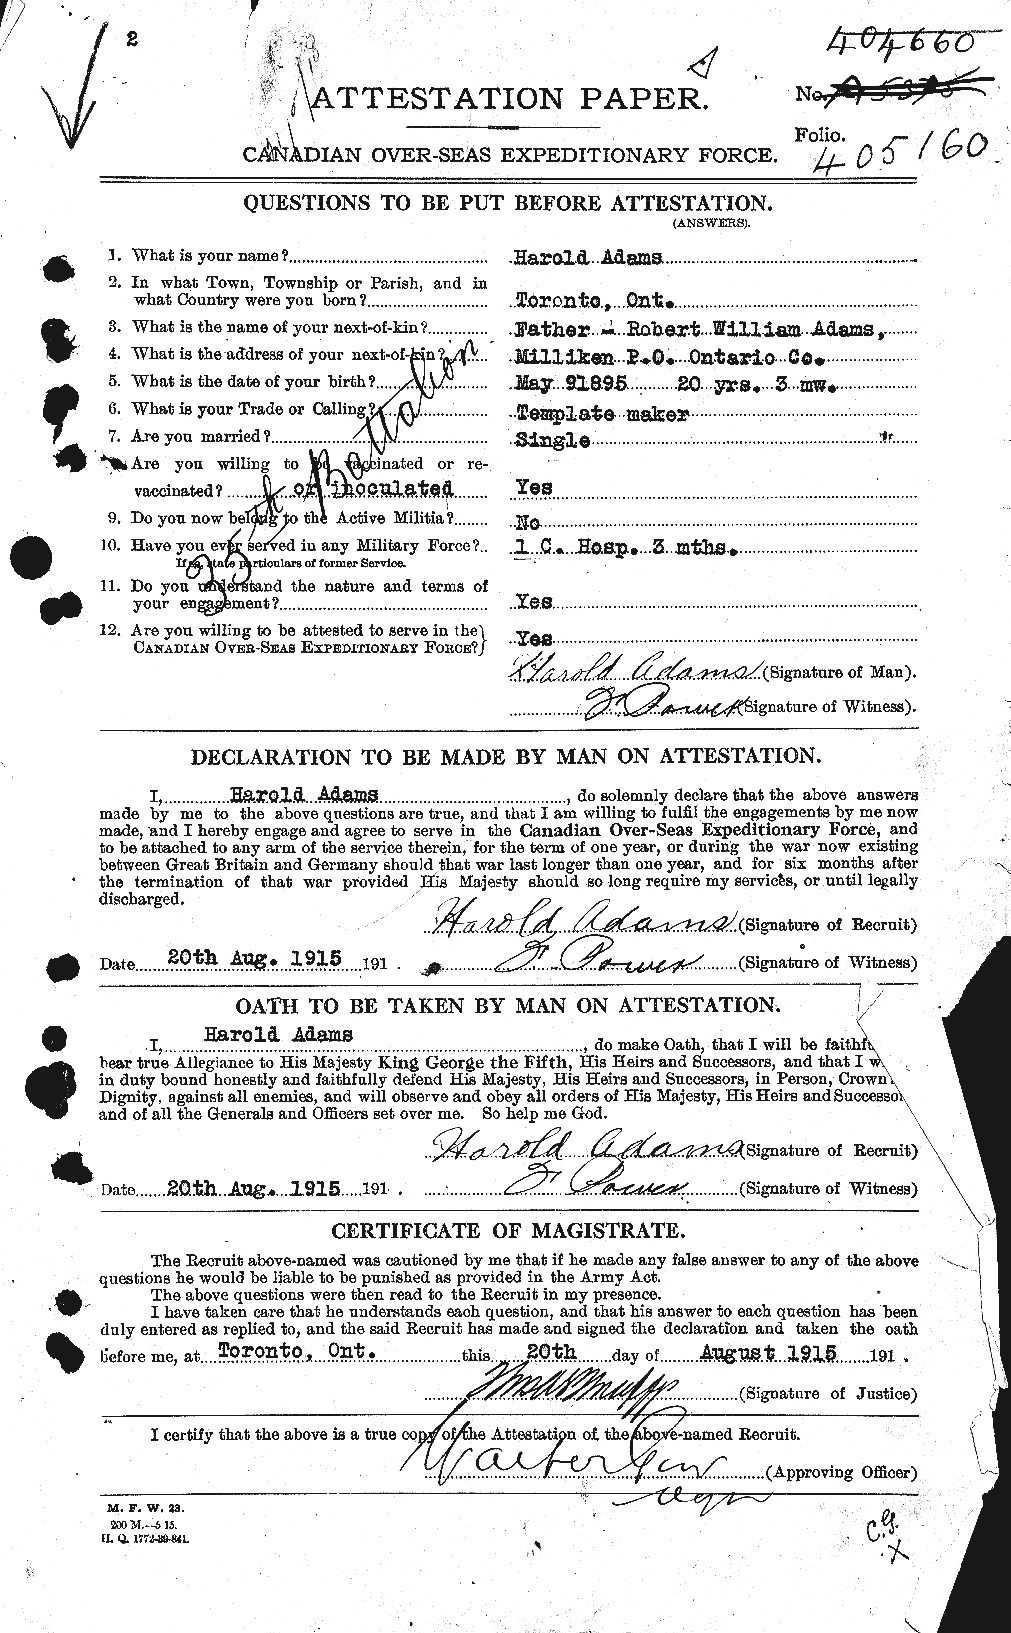 Personnel Records of the First World War - CEF 203145a